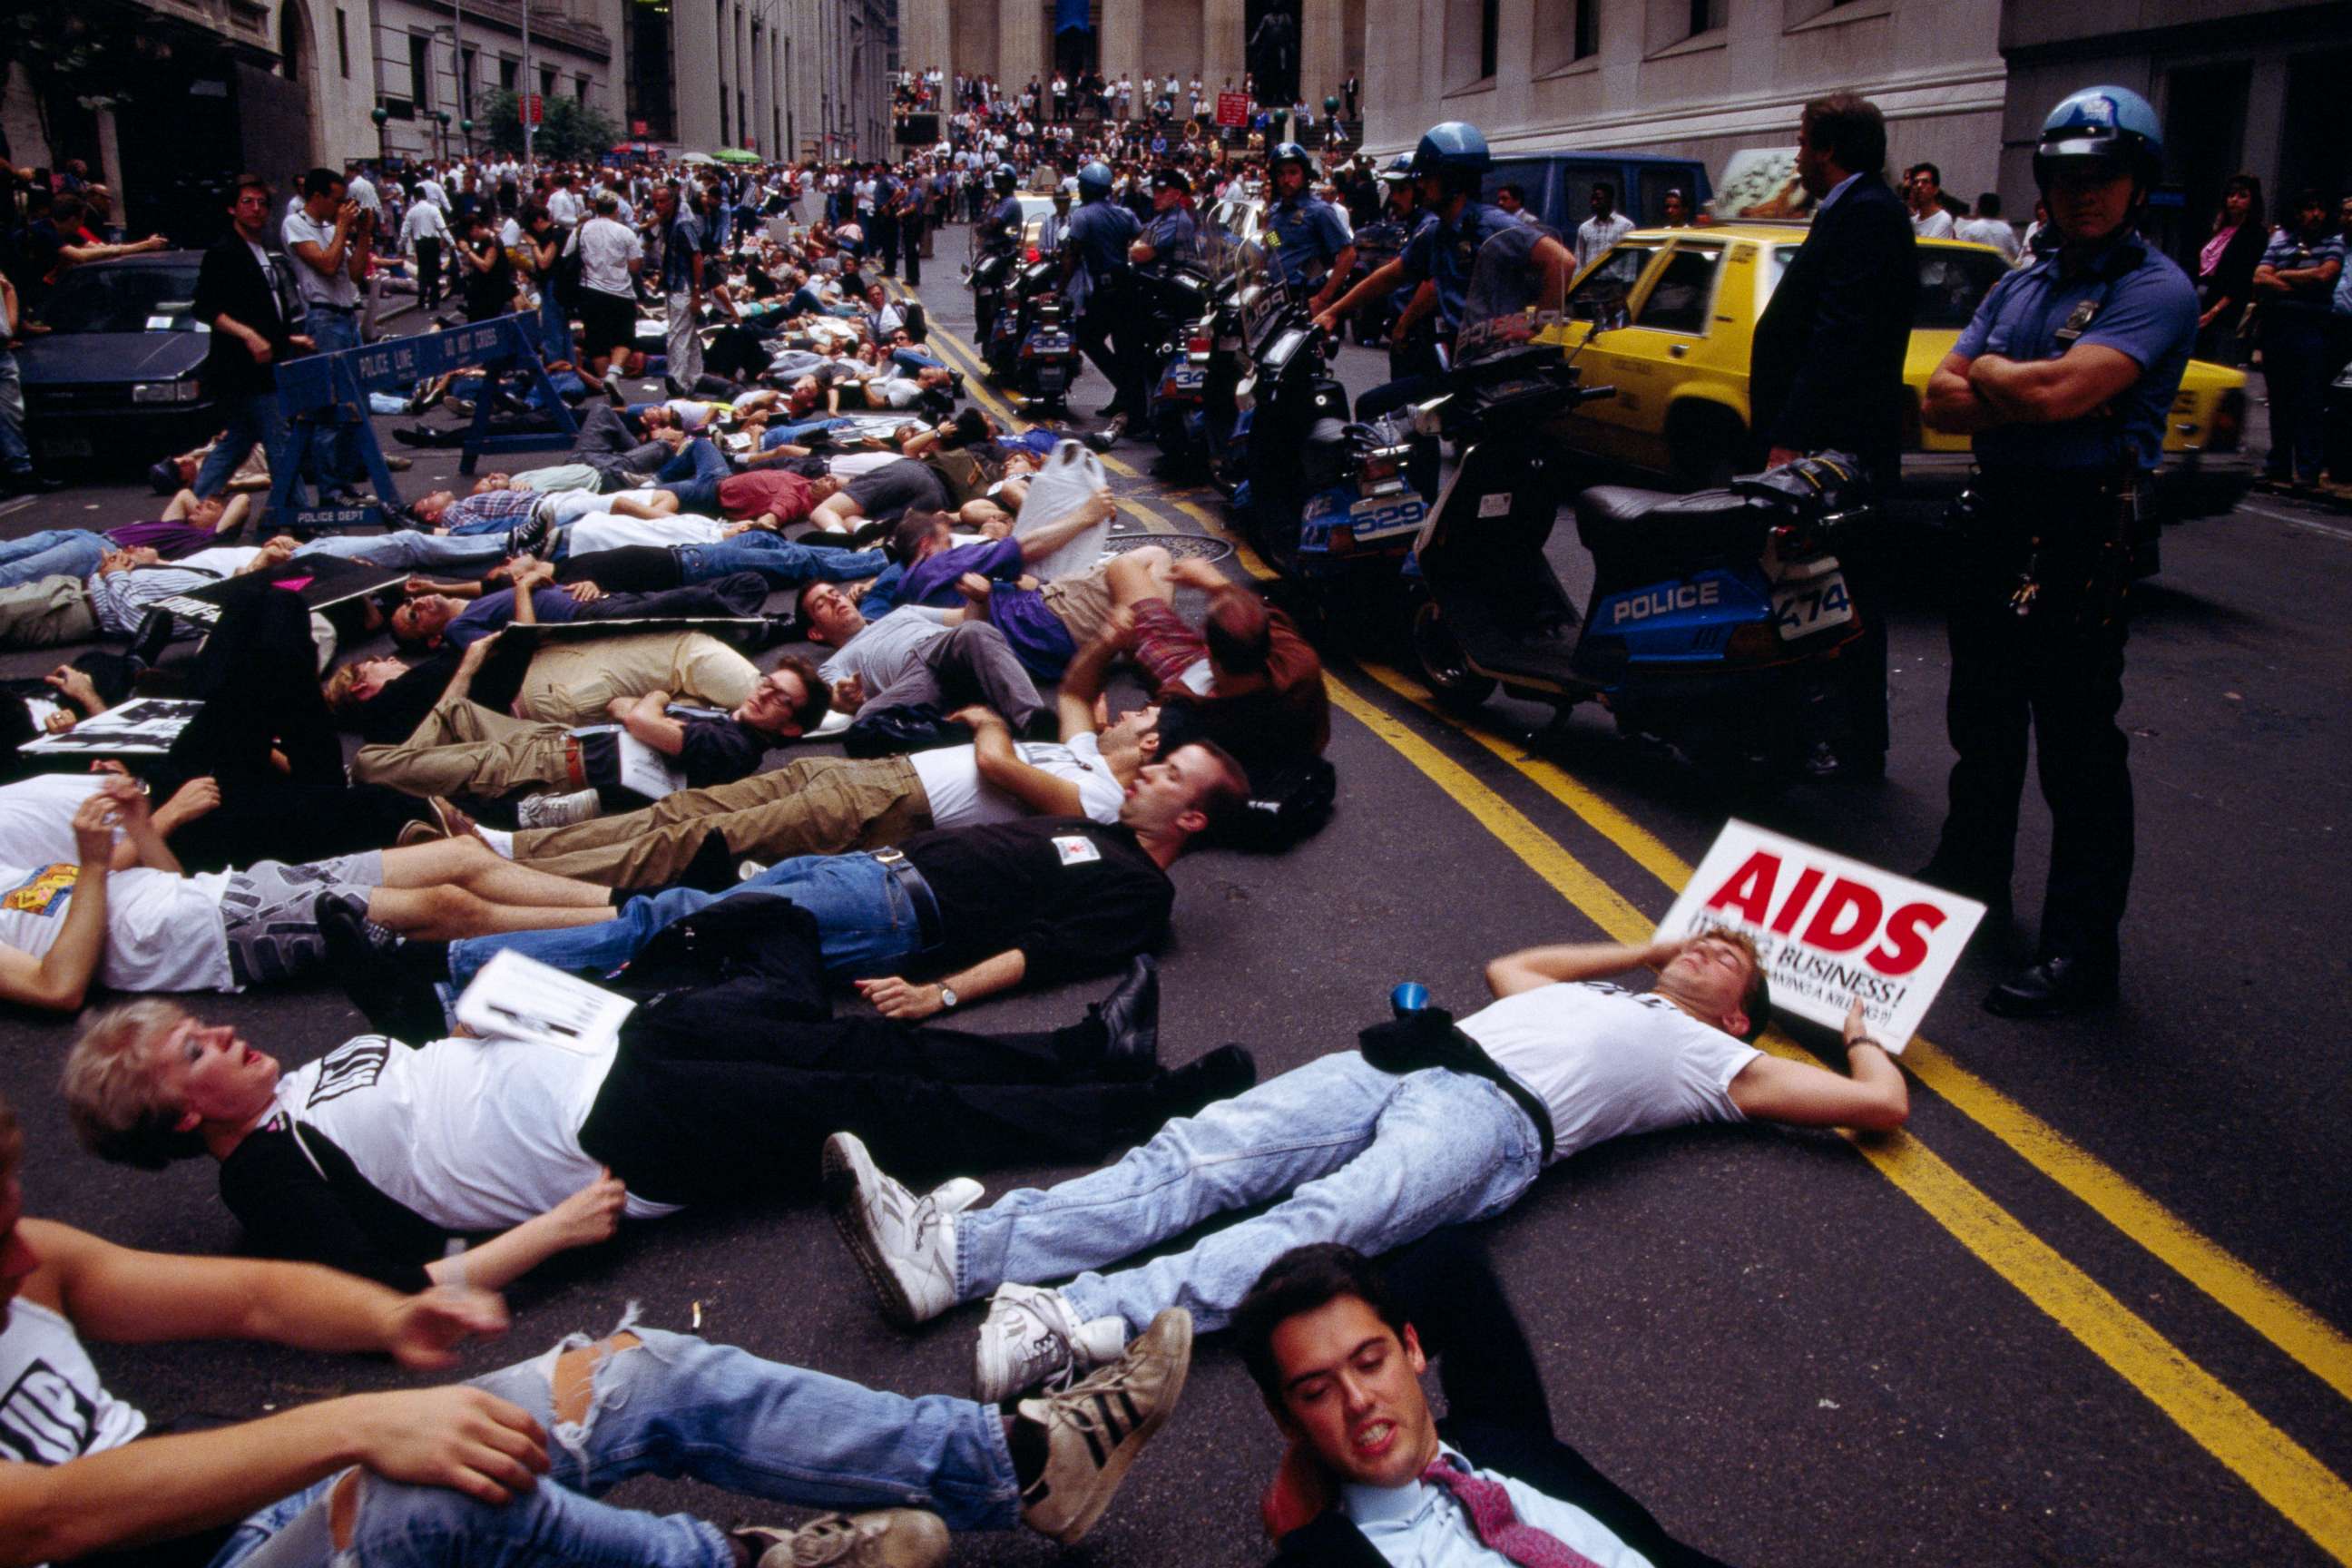 PHOTO: Demonstrators gather in front of the Federal Hall National Memorial in Wall Street in protest of the rising prices of AIDS medication AZT.